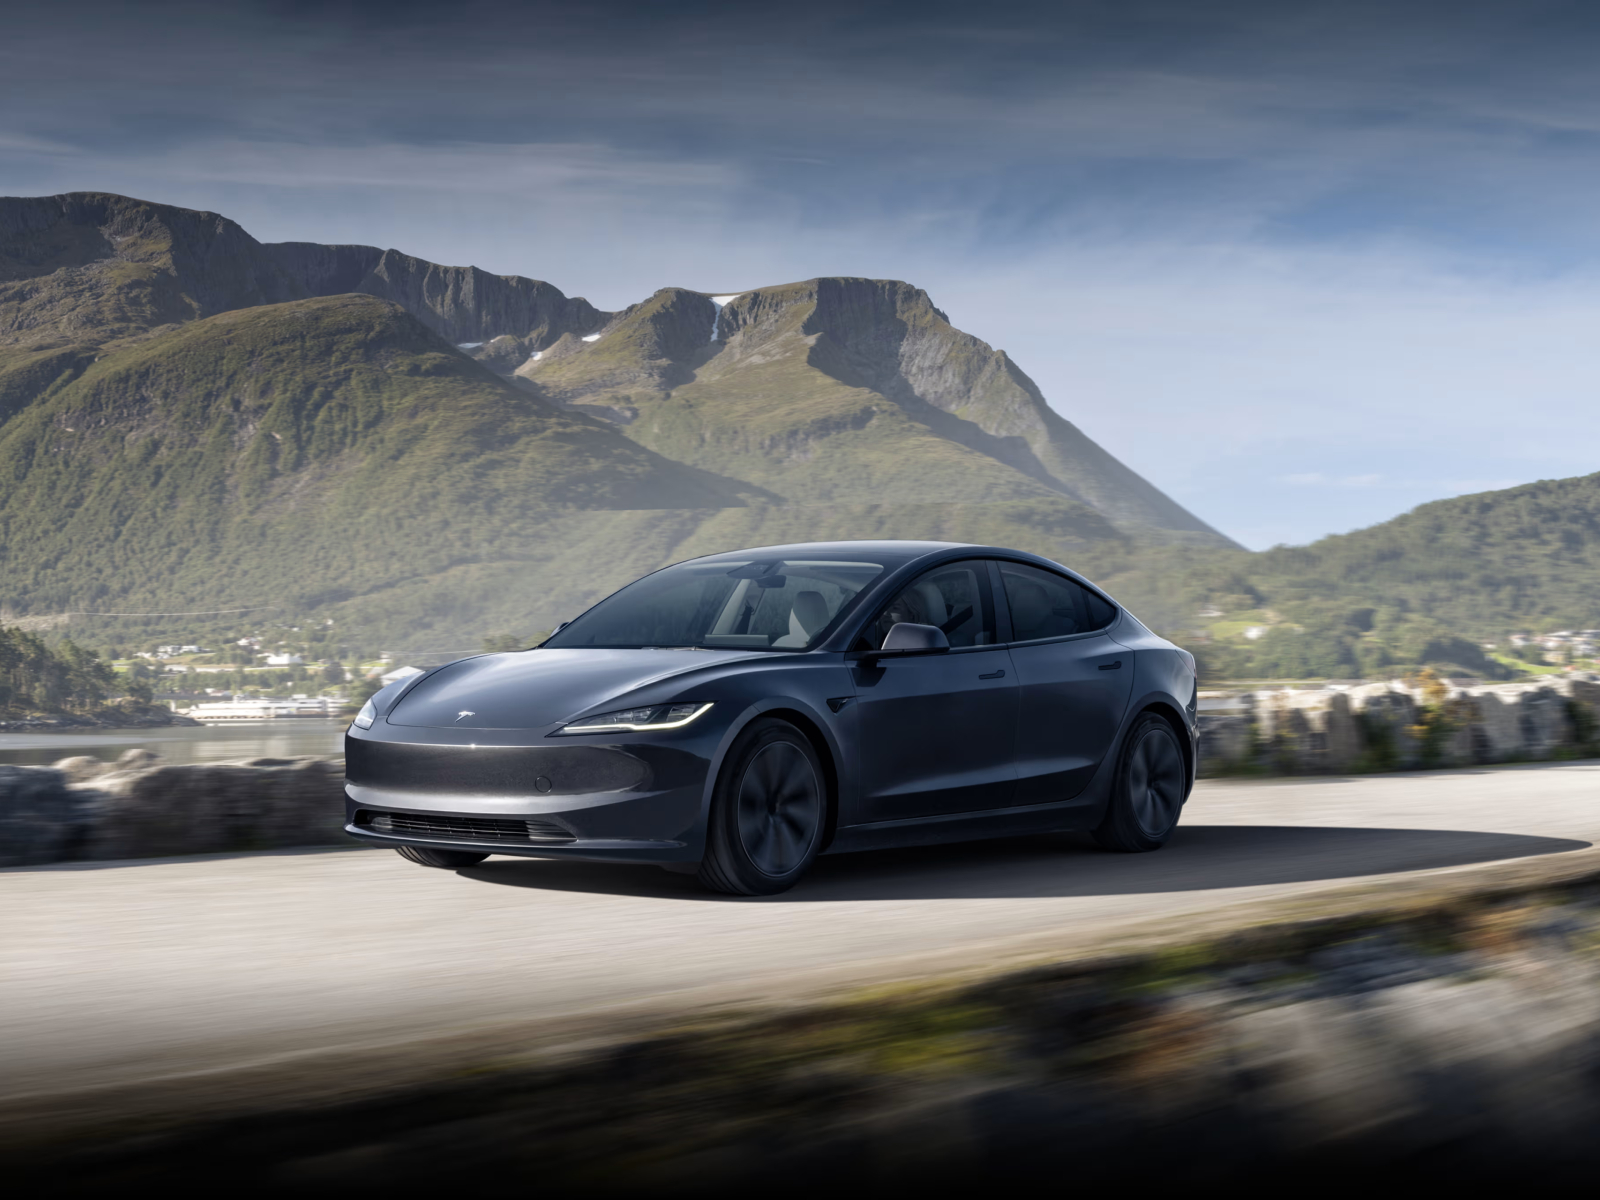 A gray Tesla Model 3 Highland refresh on a road with mountains in the background.